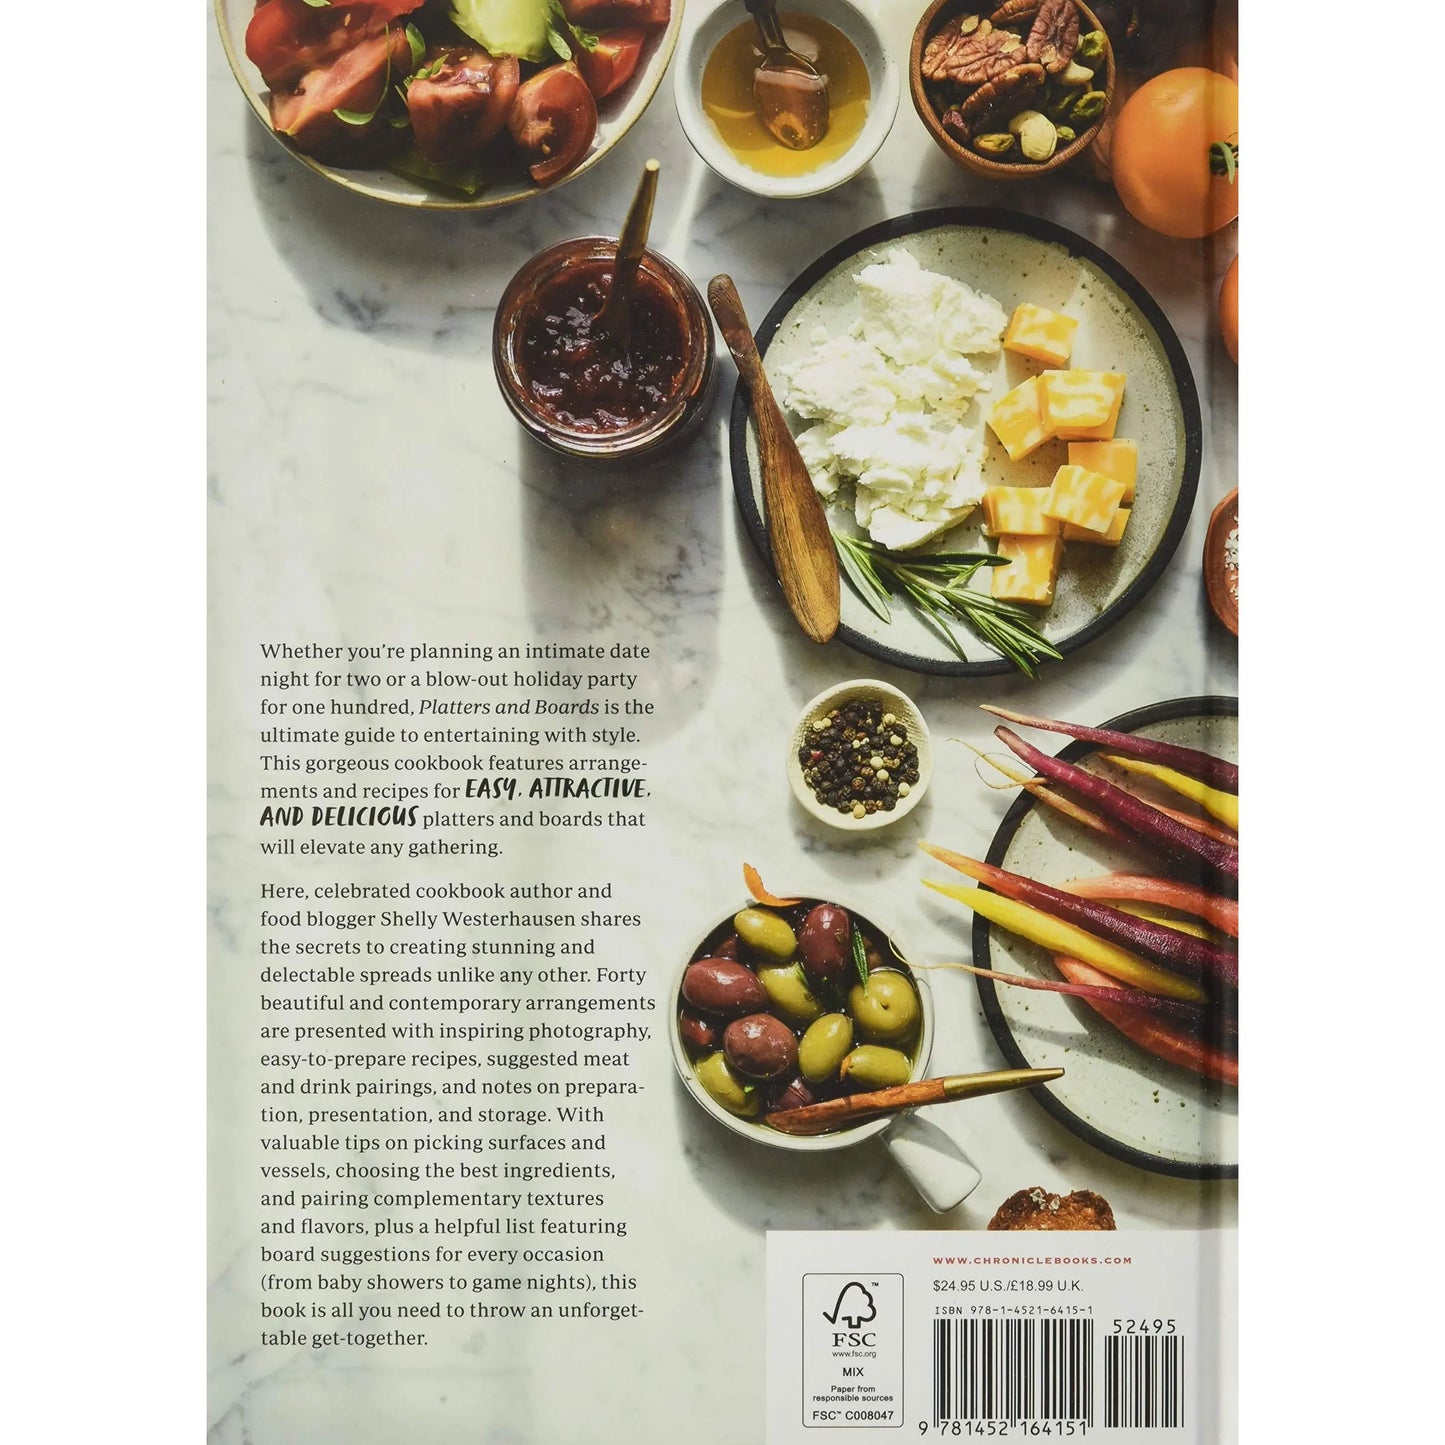 Platters and Boards: Beautiful, Casual Spreads for Every Occasion by Shelly Westerhausen PENGUIN HOUSE